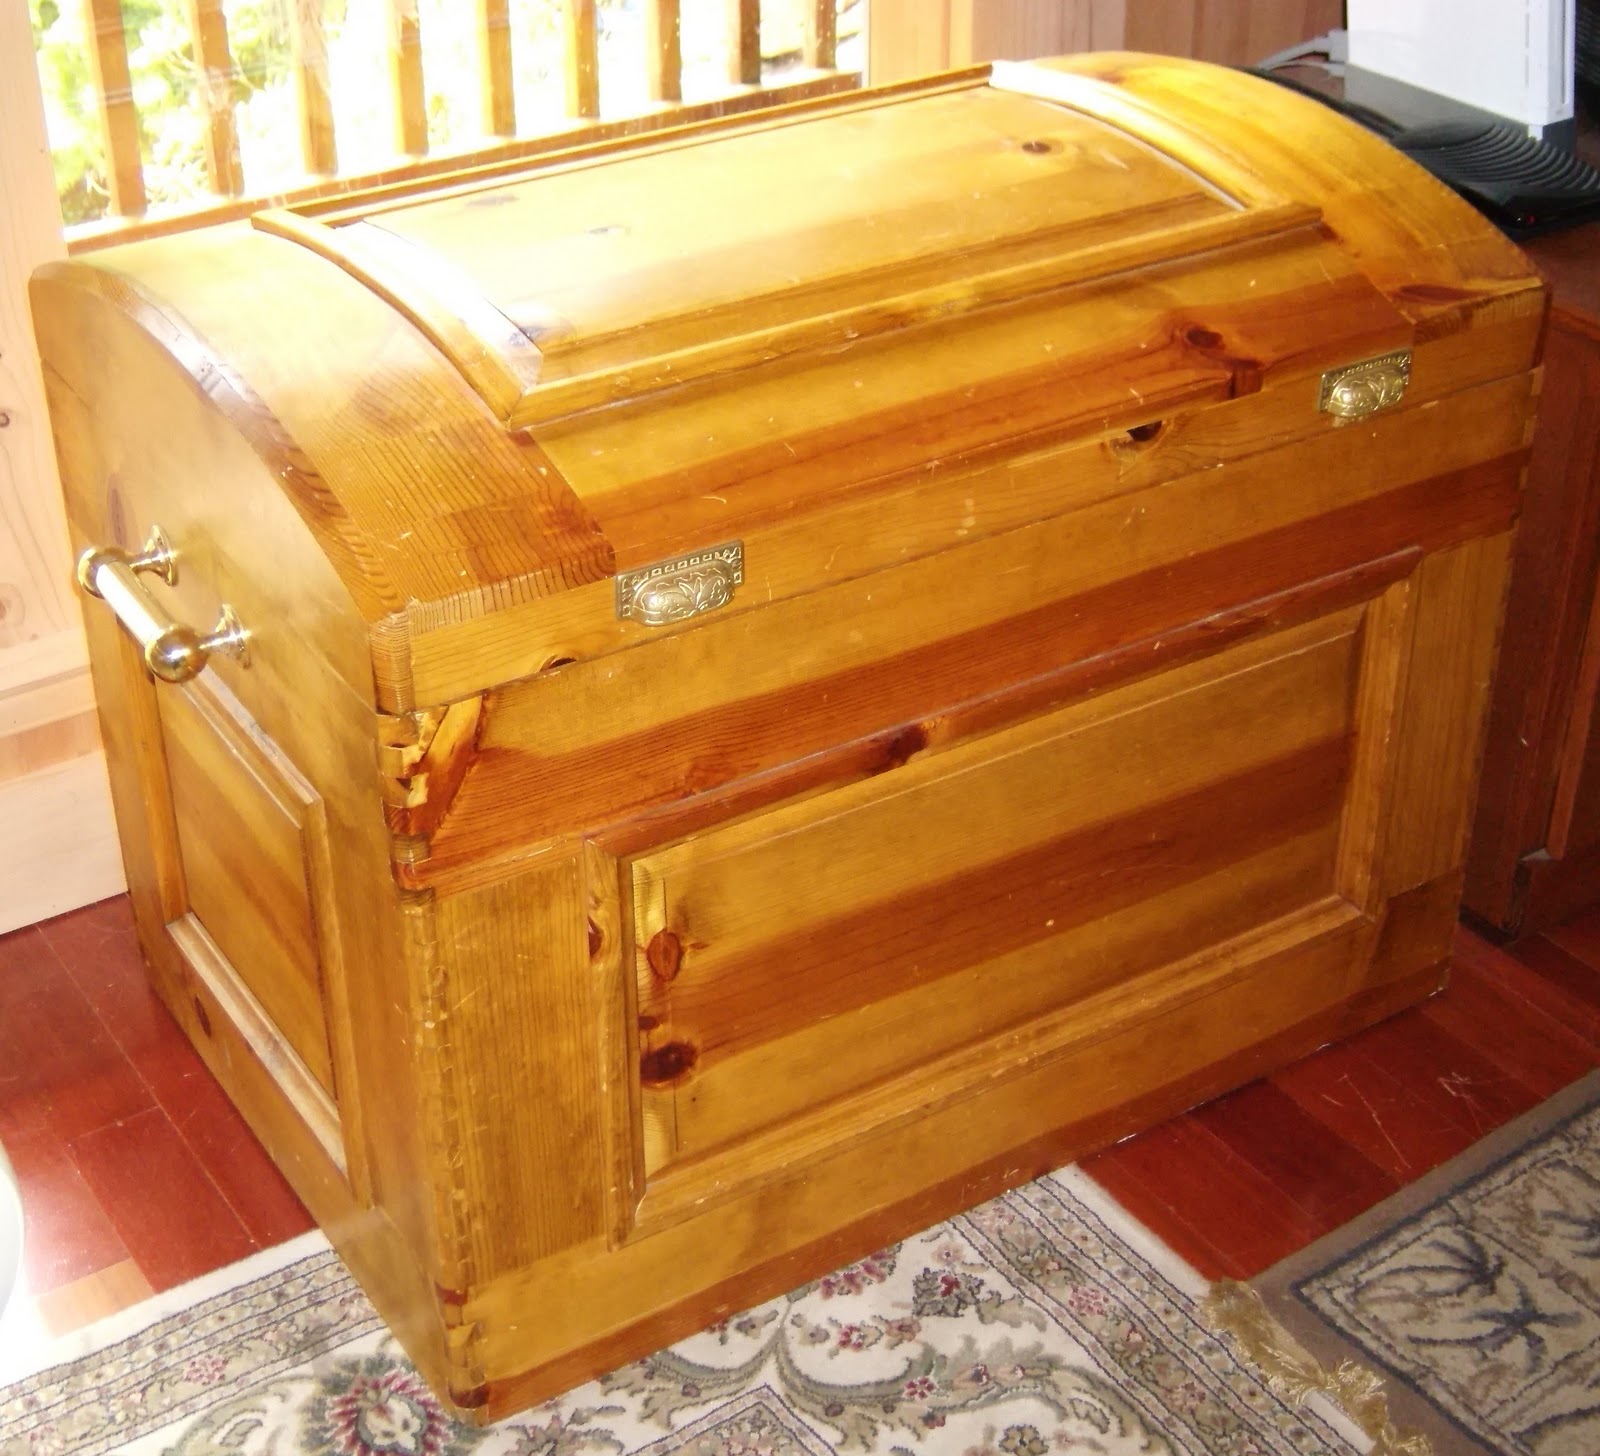 Woodworking Chest Recommendations